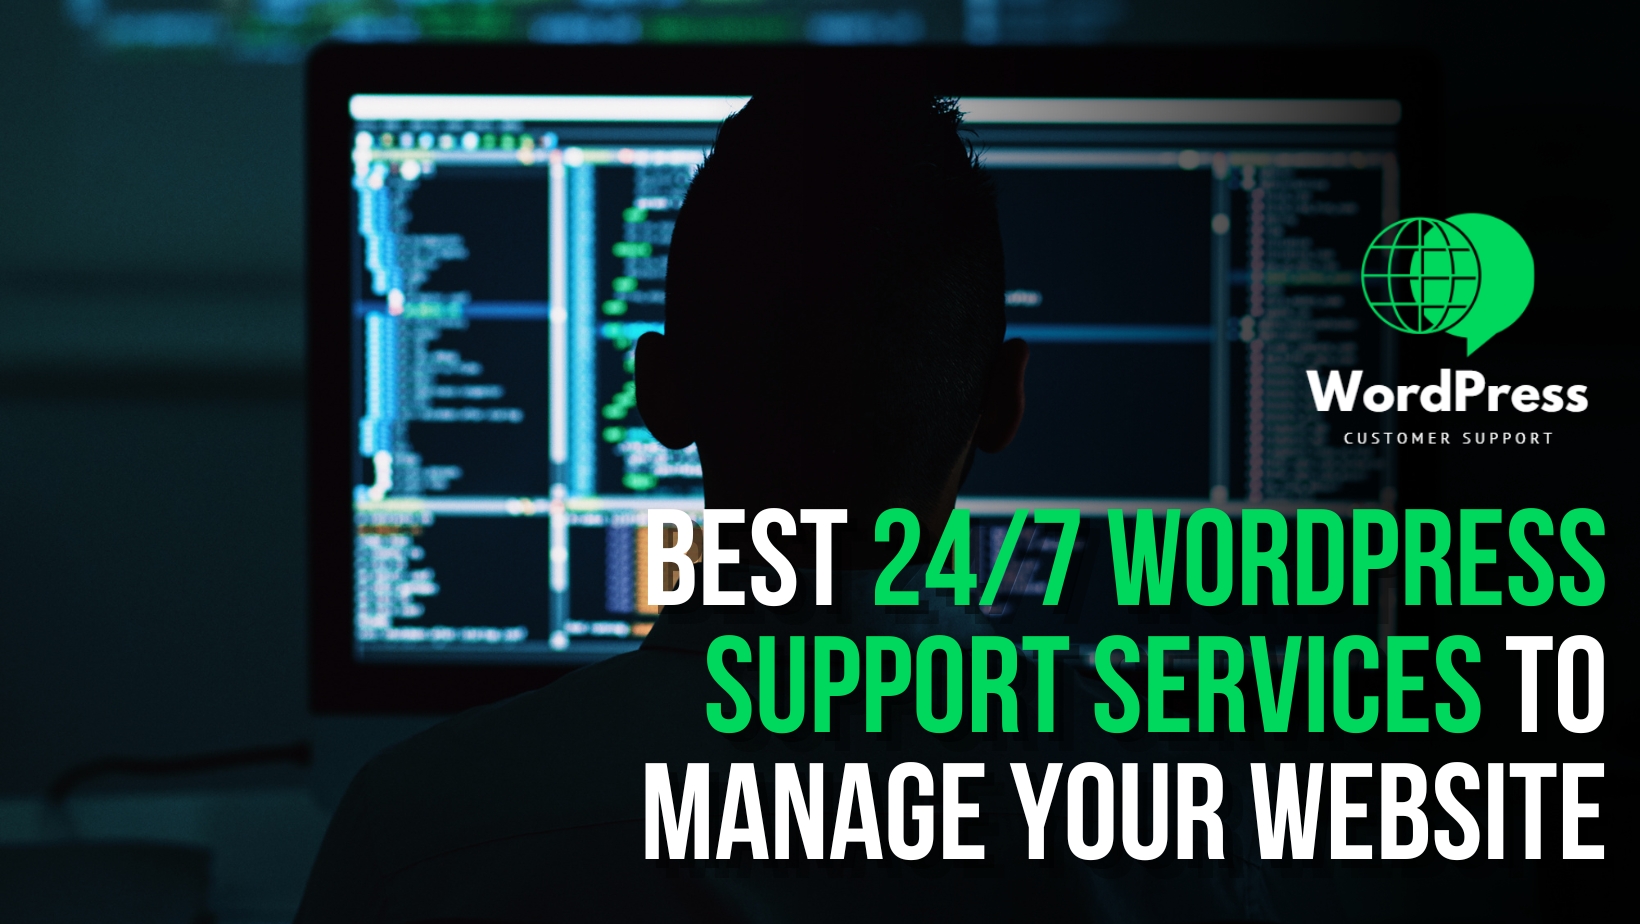 Best 24/7 WordPress Support Services to Manage Your Website